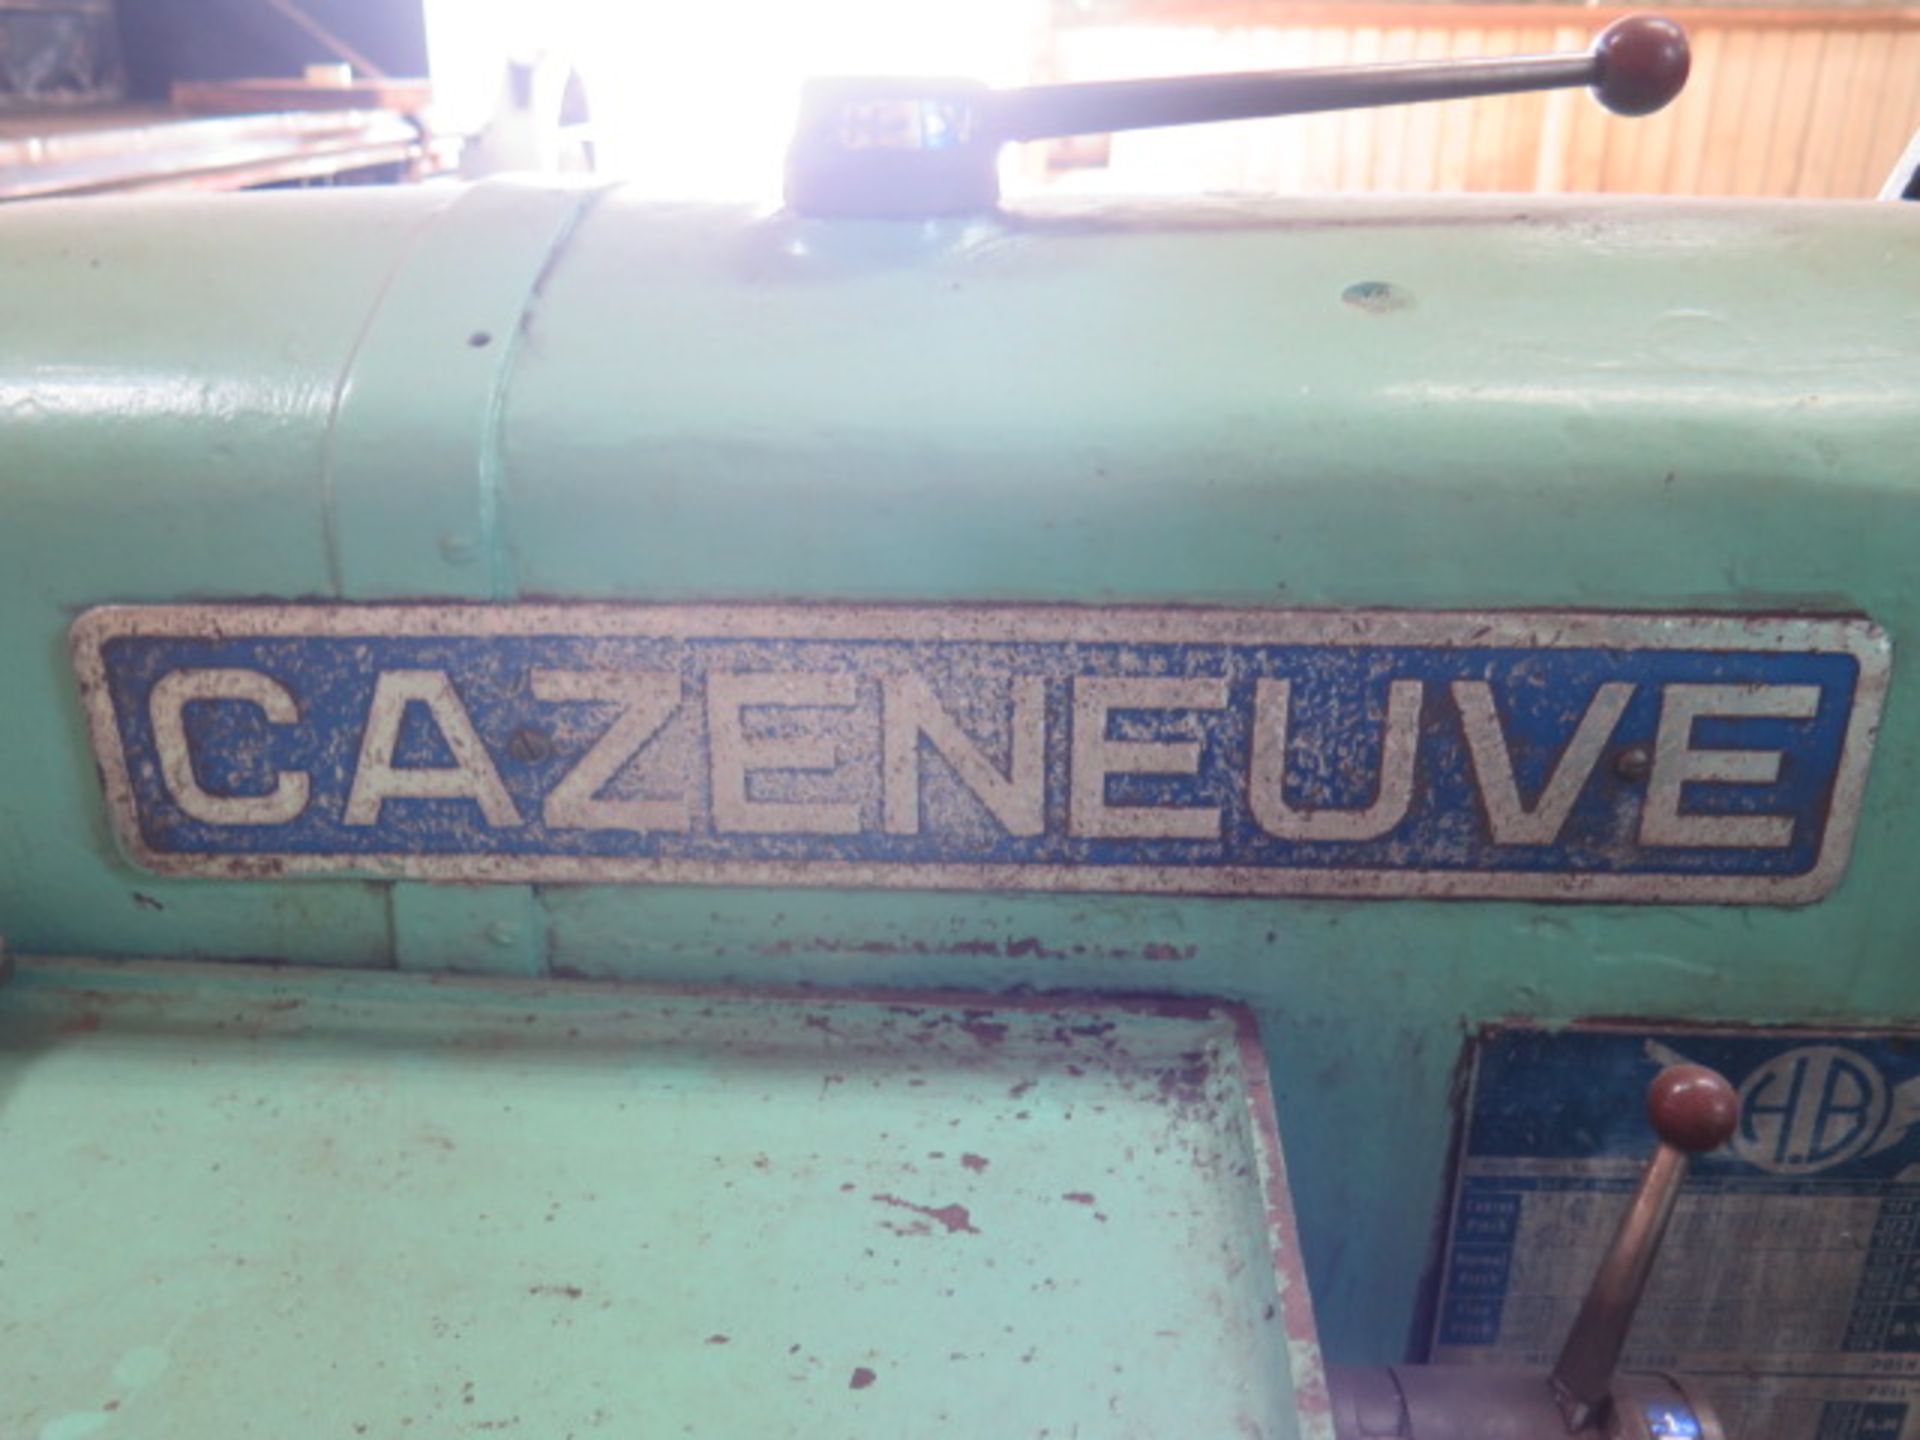 Cazeneuve HB725 26” x 154” Geared Bed Lathe w/ 3 1/8” Thru Spindle, Inch/mm Threading, SOLD AS SI - Image 13 of 13